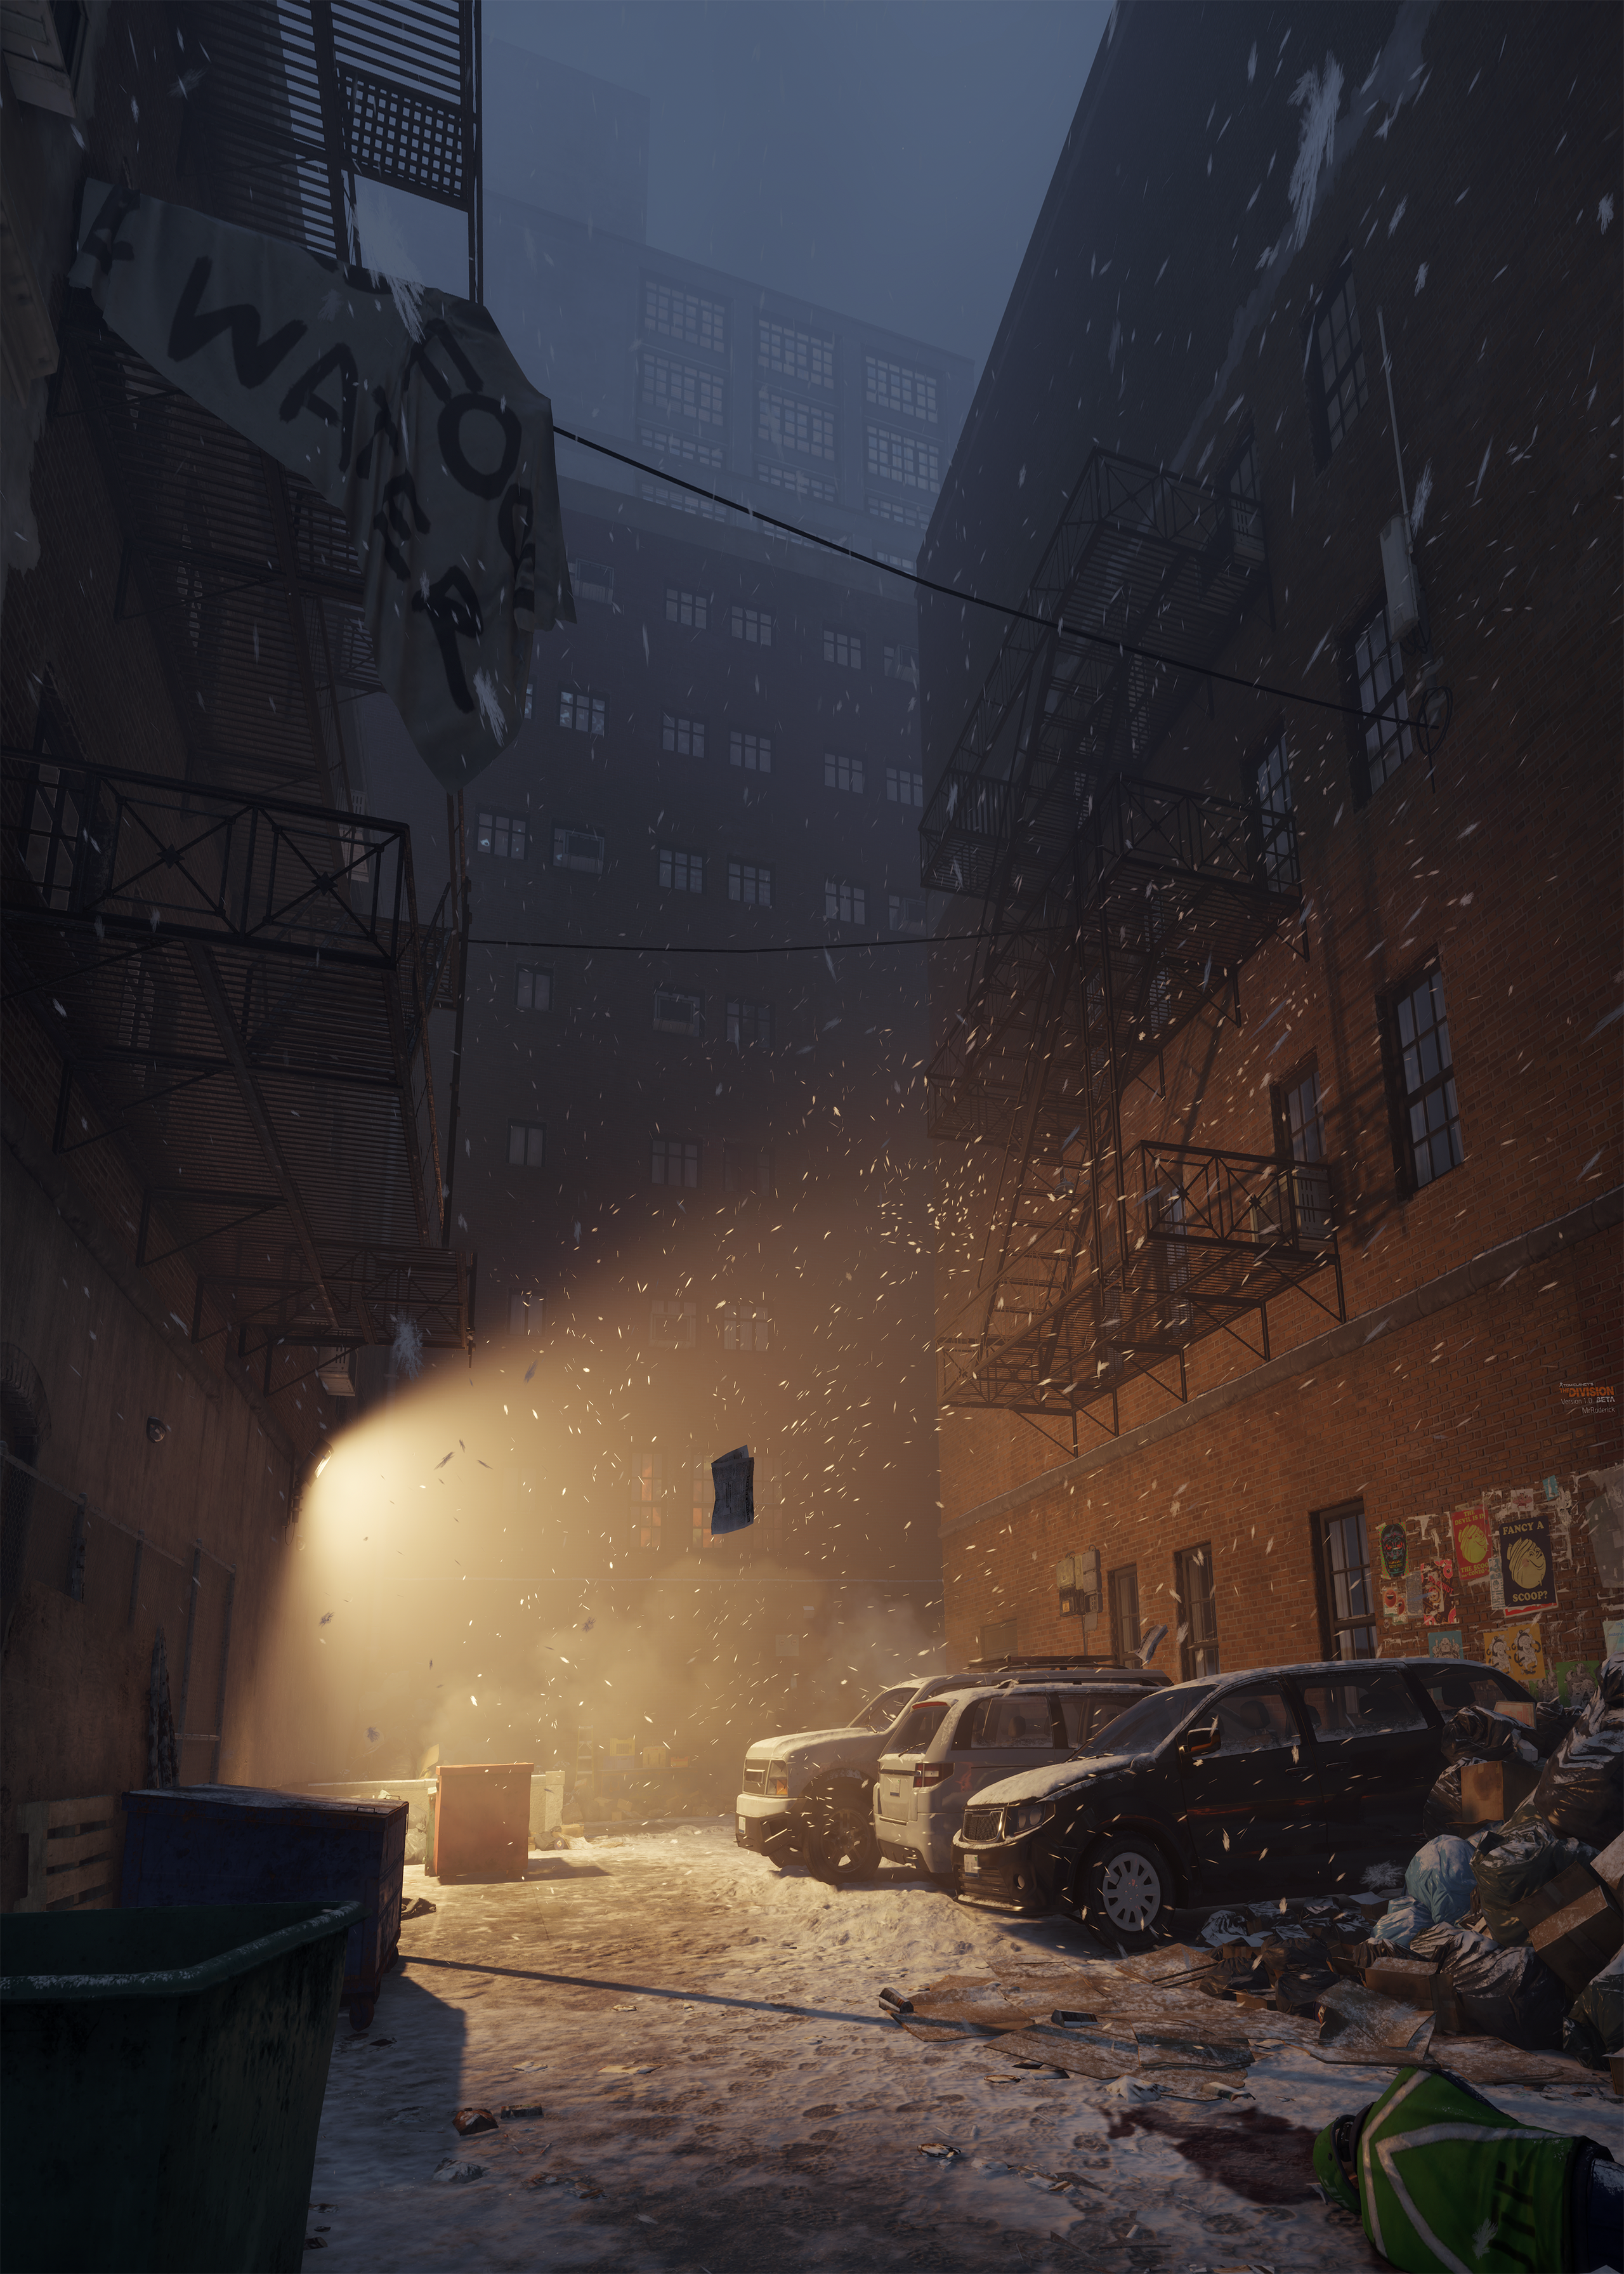 thedivision_pano_2_by_roderickartist-d9pts3d.png